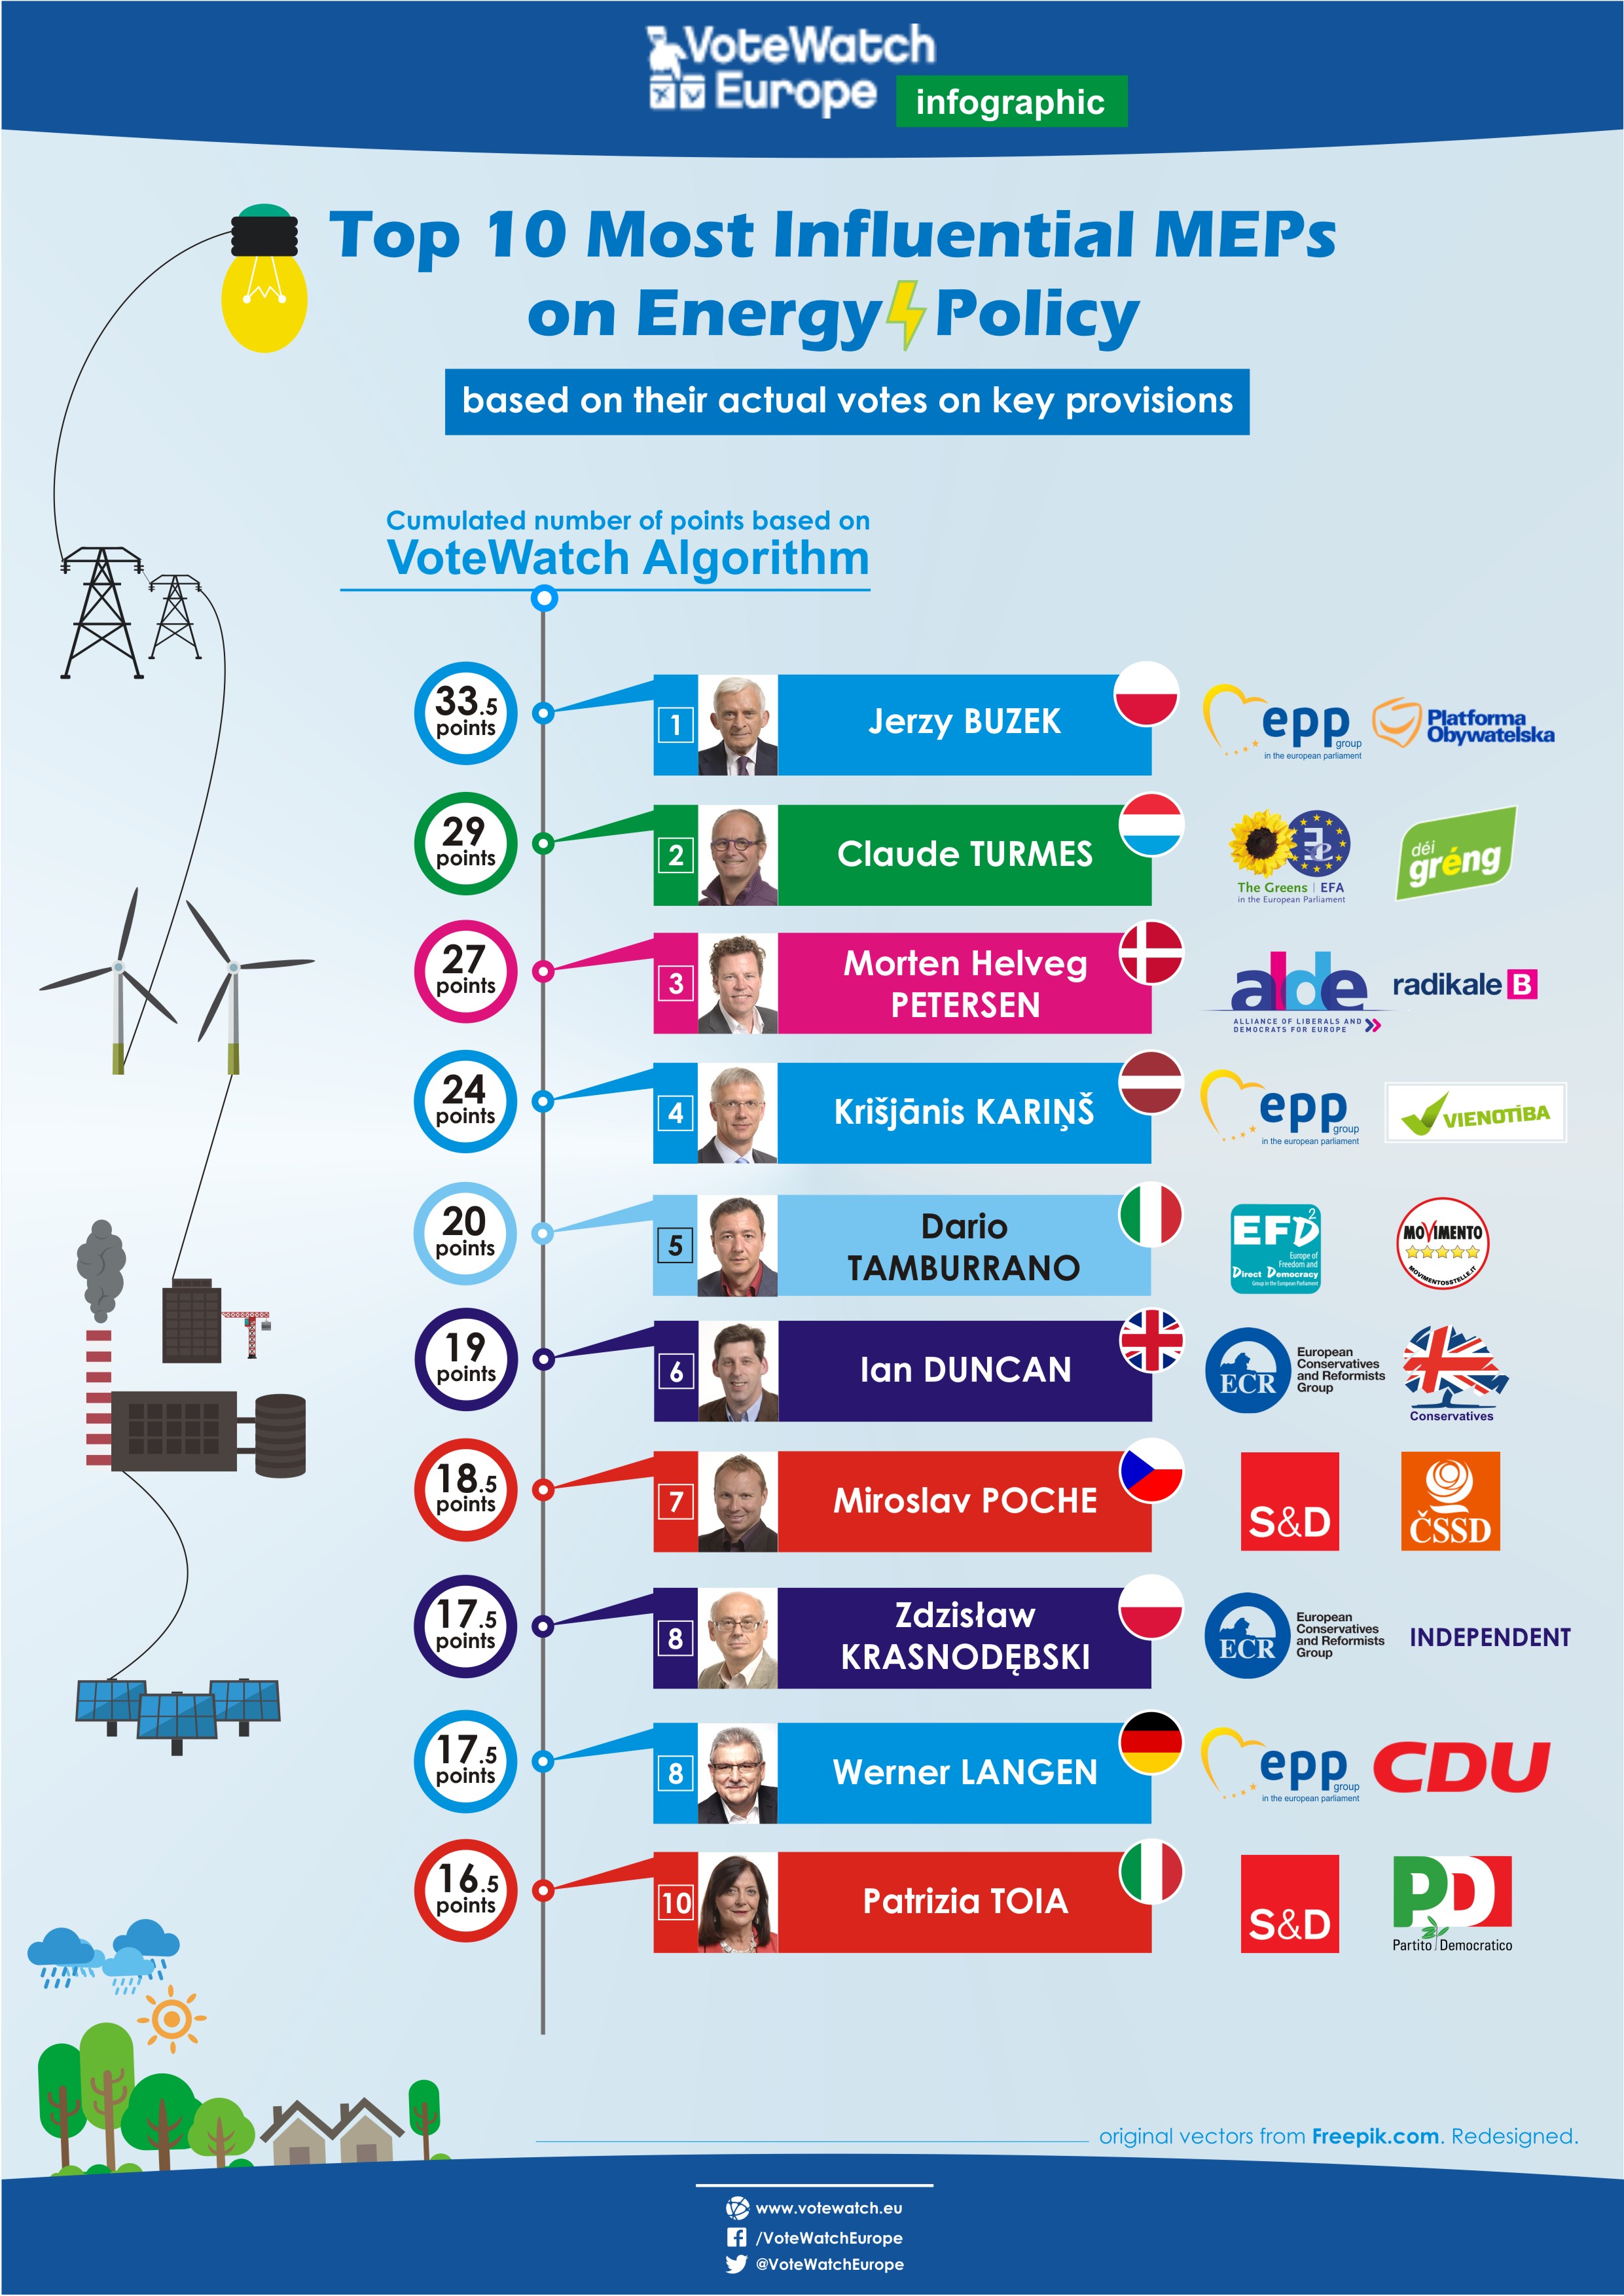 PJvw26 Top 10 Most Influential MEPs on Energy [draft5.1][28nov2016]